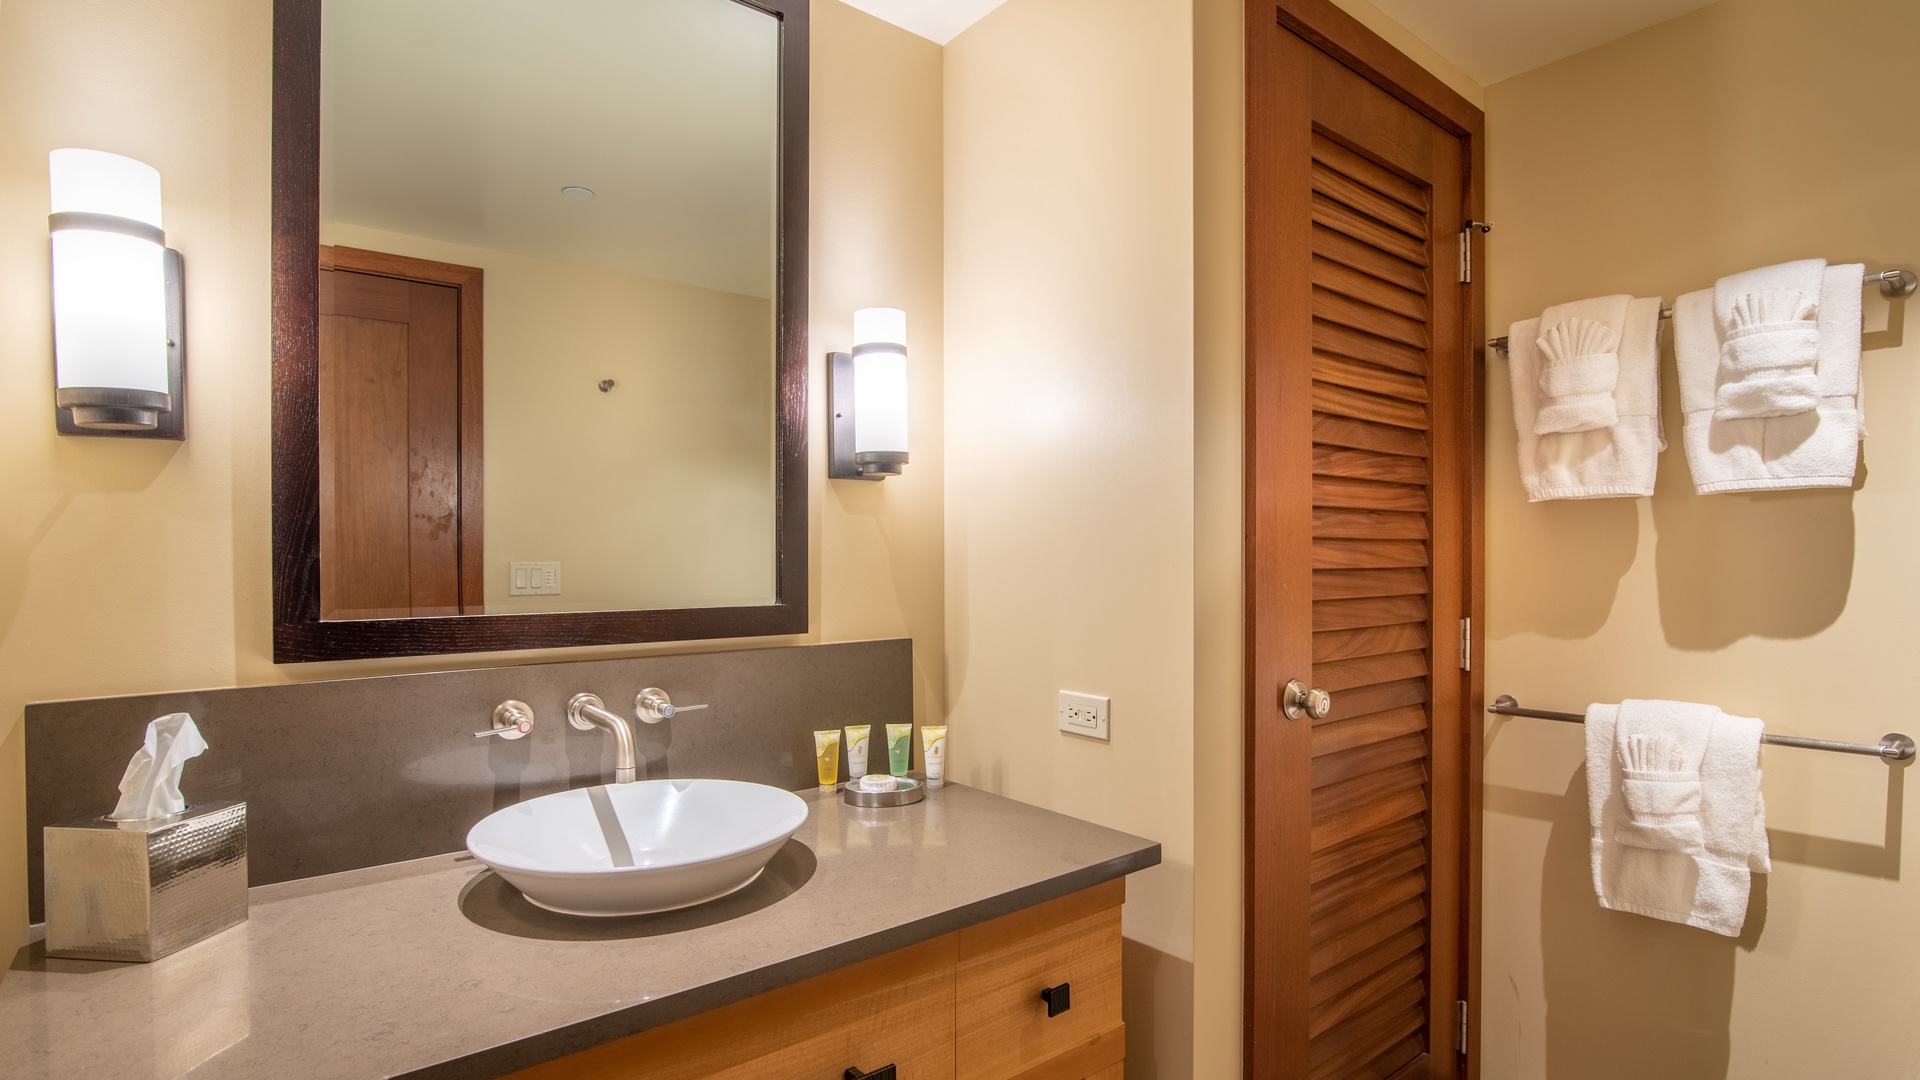 Kapolei Vacation Rentals, Ko Olina Beach Villas B608 - The second guest bathroom with warm wood accents.